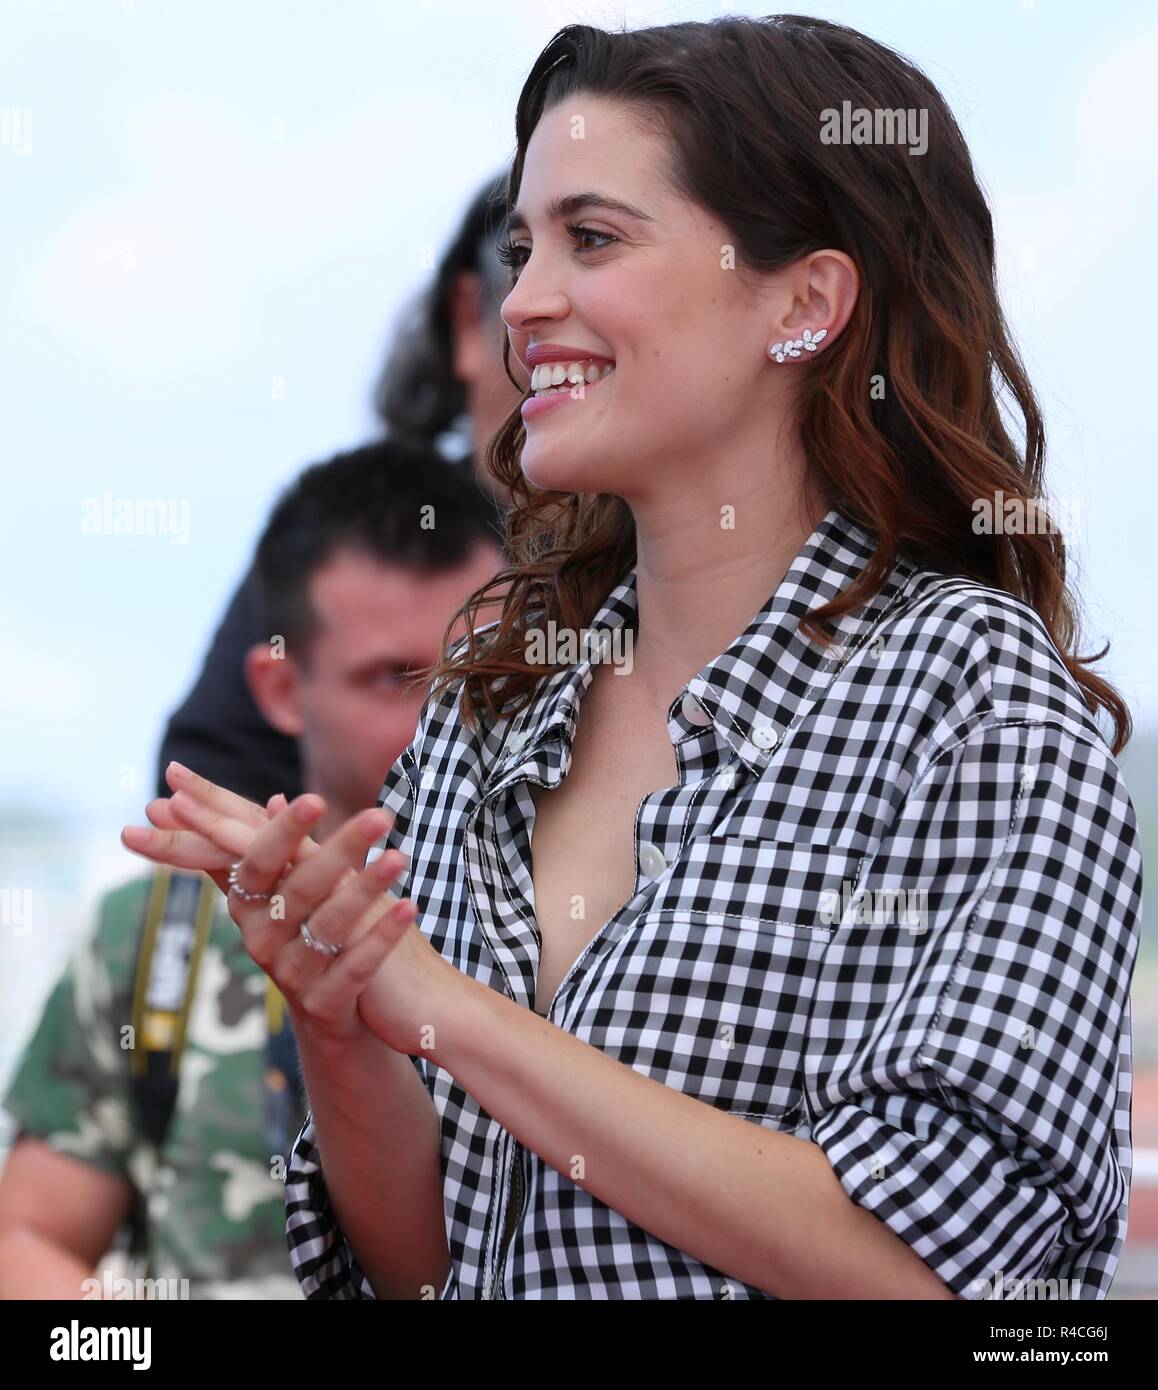 CANNES, FRANCE – MAY 19, 2018: Joana Ribeiro at the 'The Man Who Killed Don Quixote' photocall during the 71st Cannes Film Festival Stock Photo